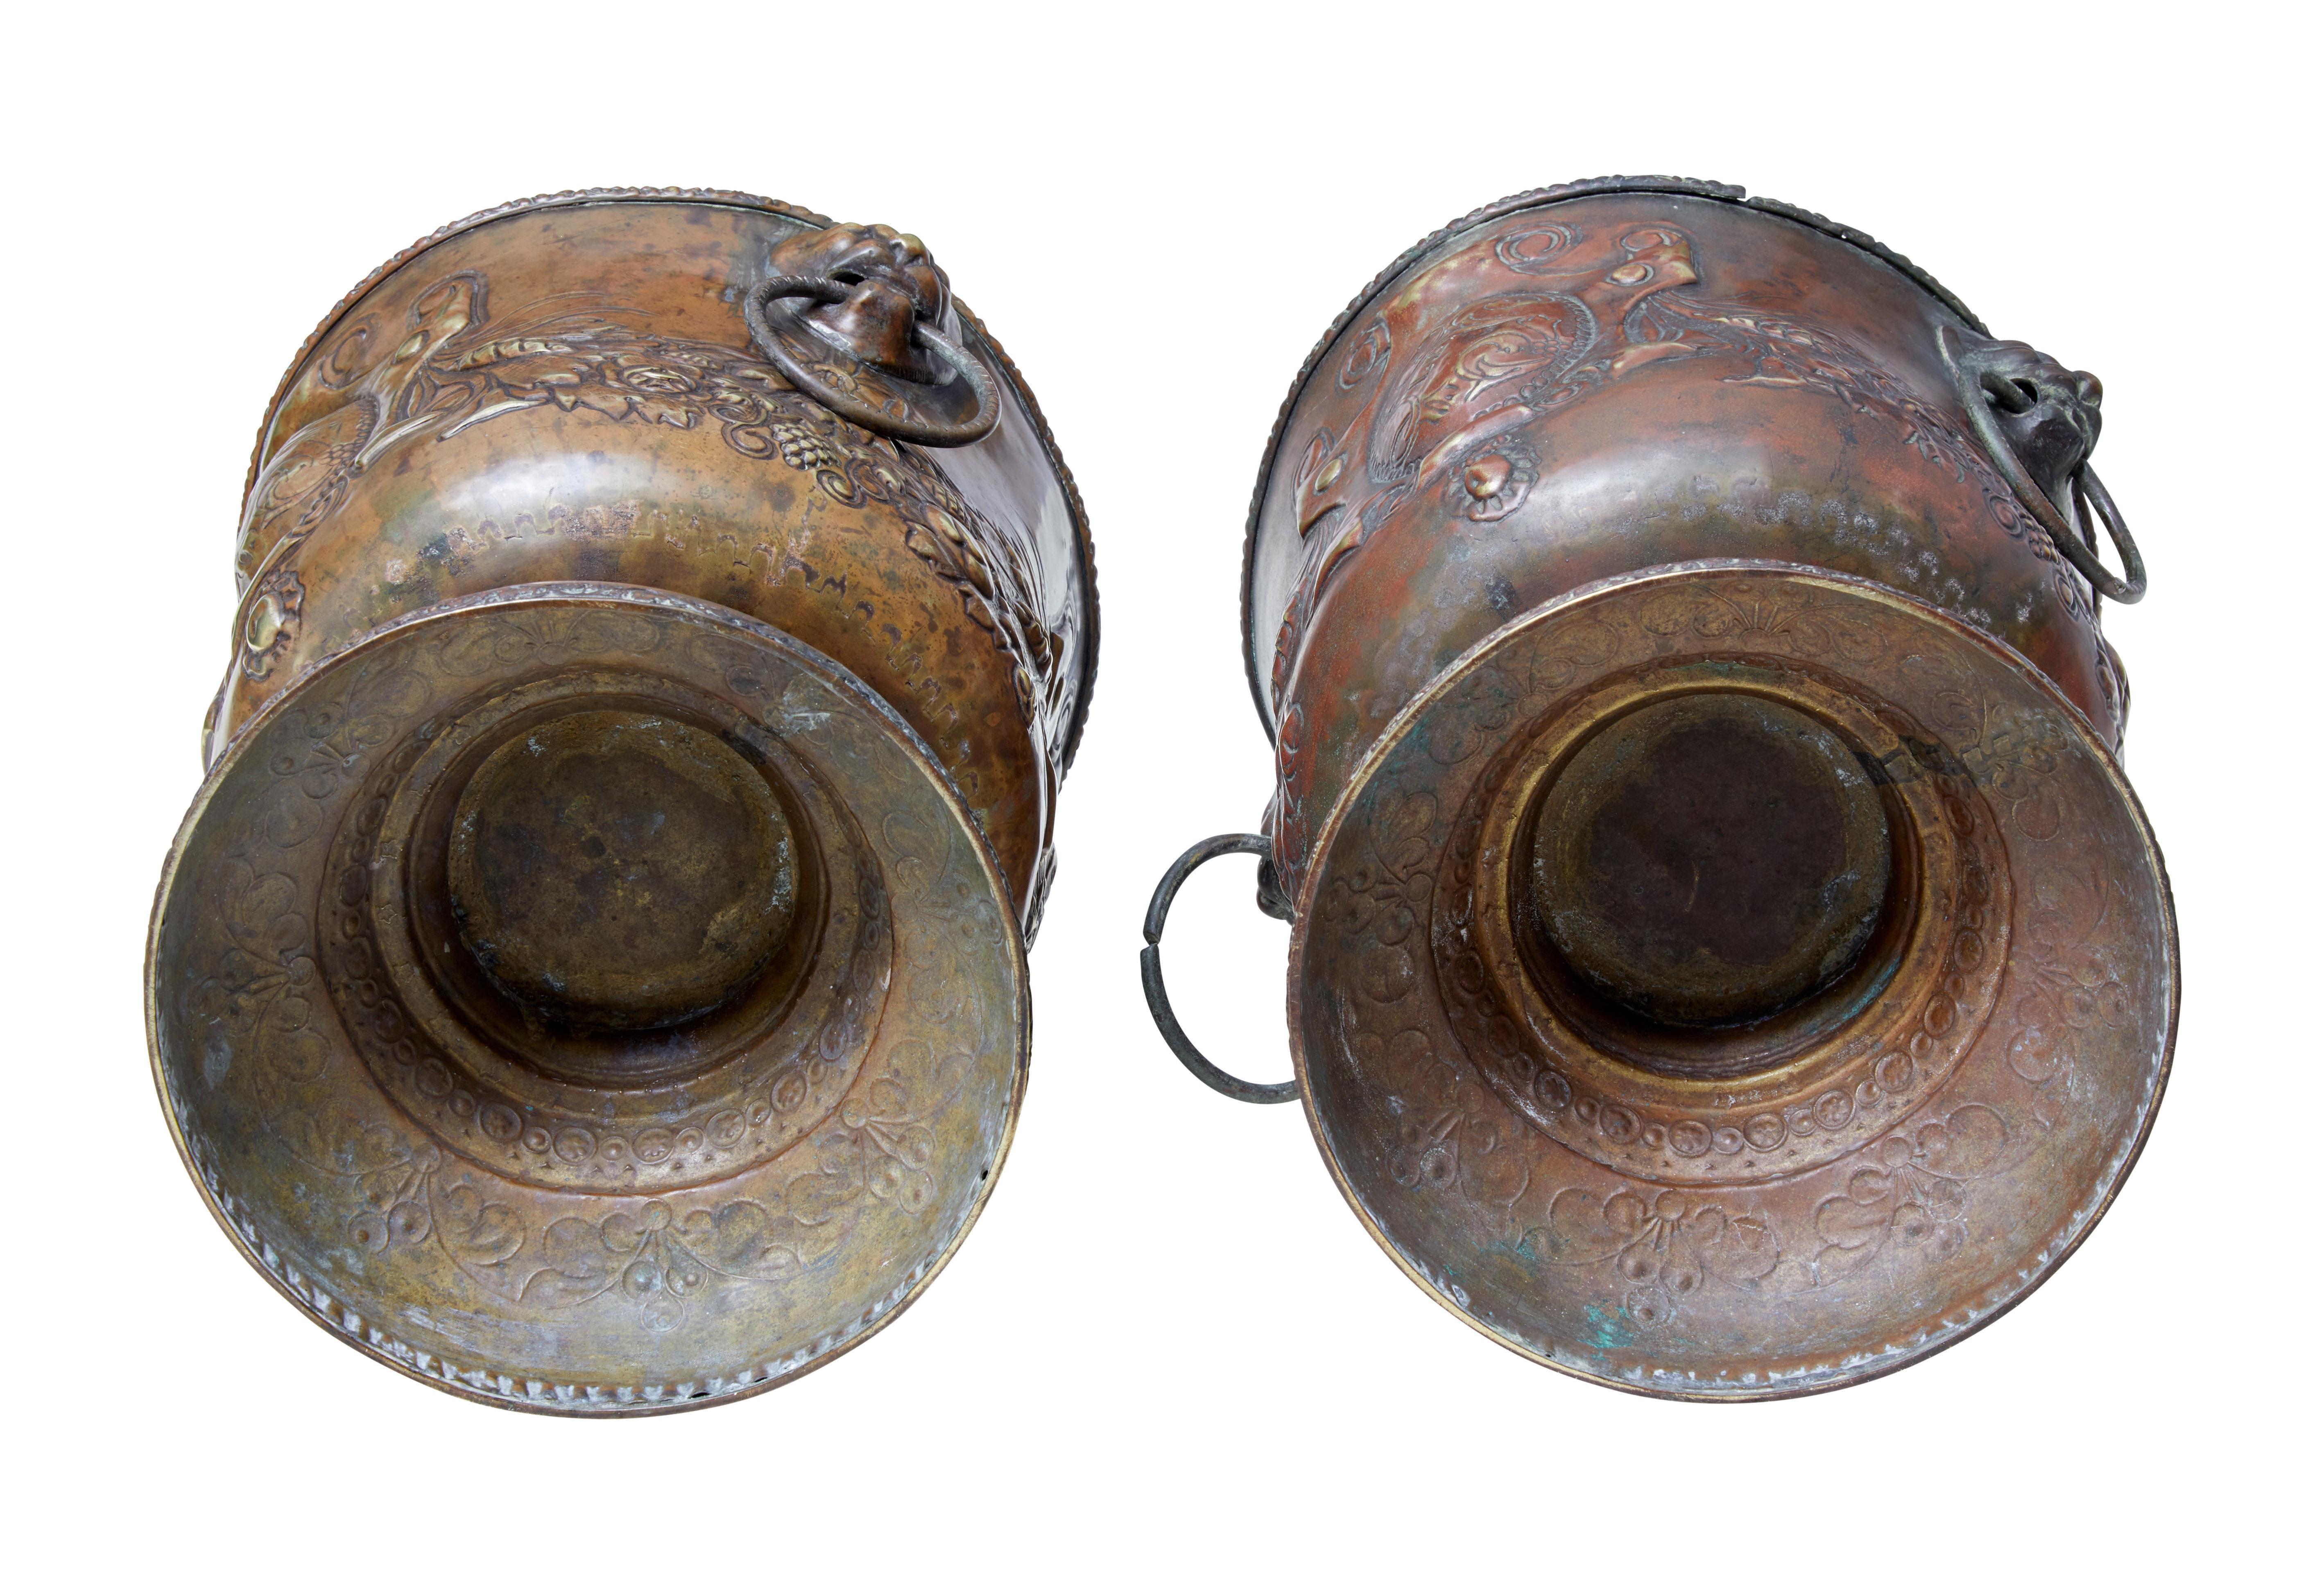 Repoussé Pair of Late 19th Century Repousse Copper Wine Coolers